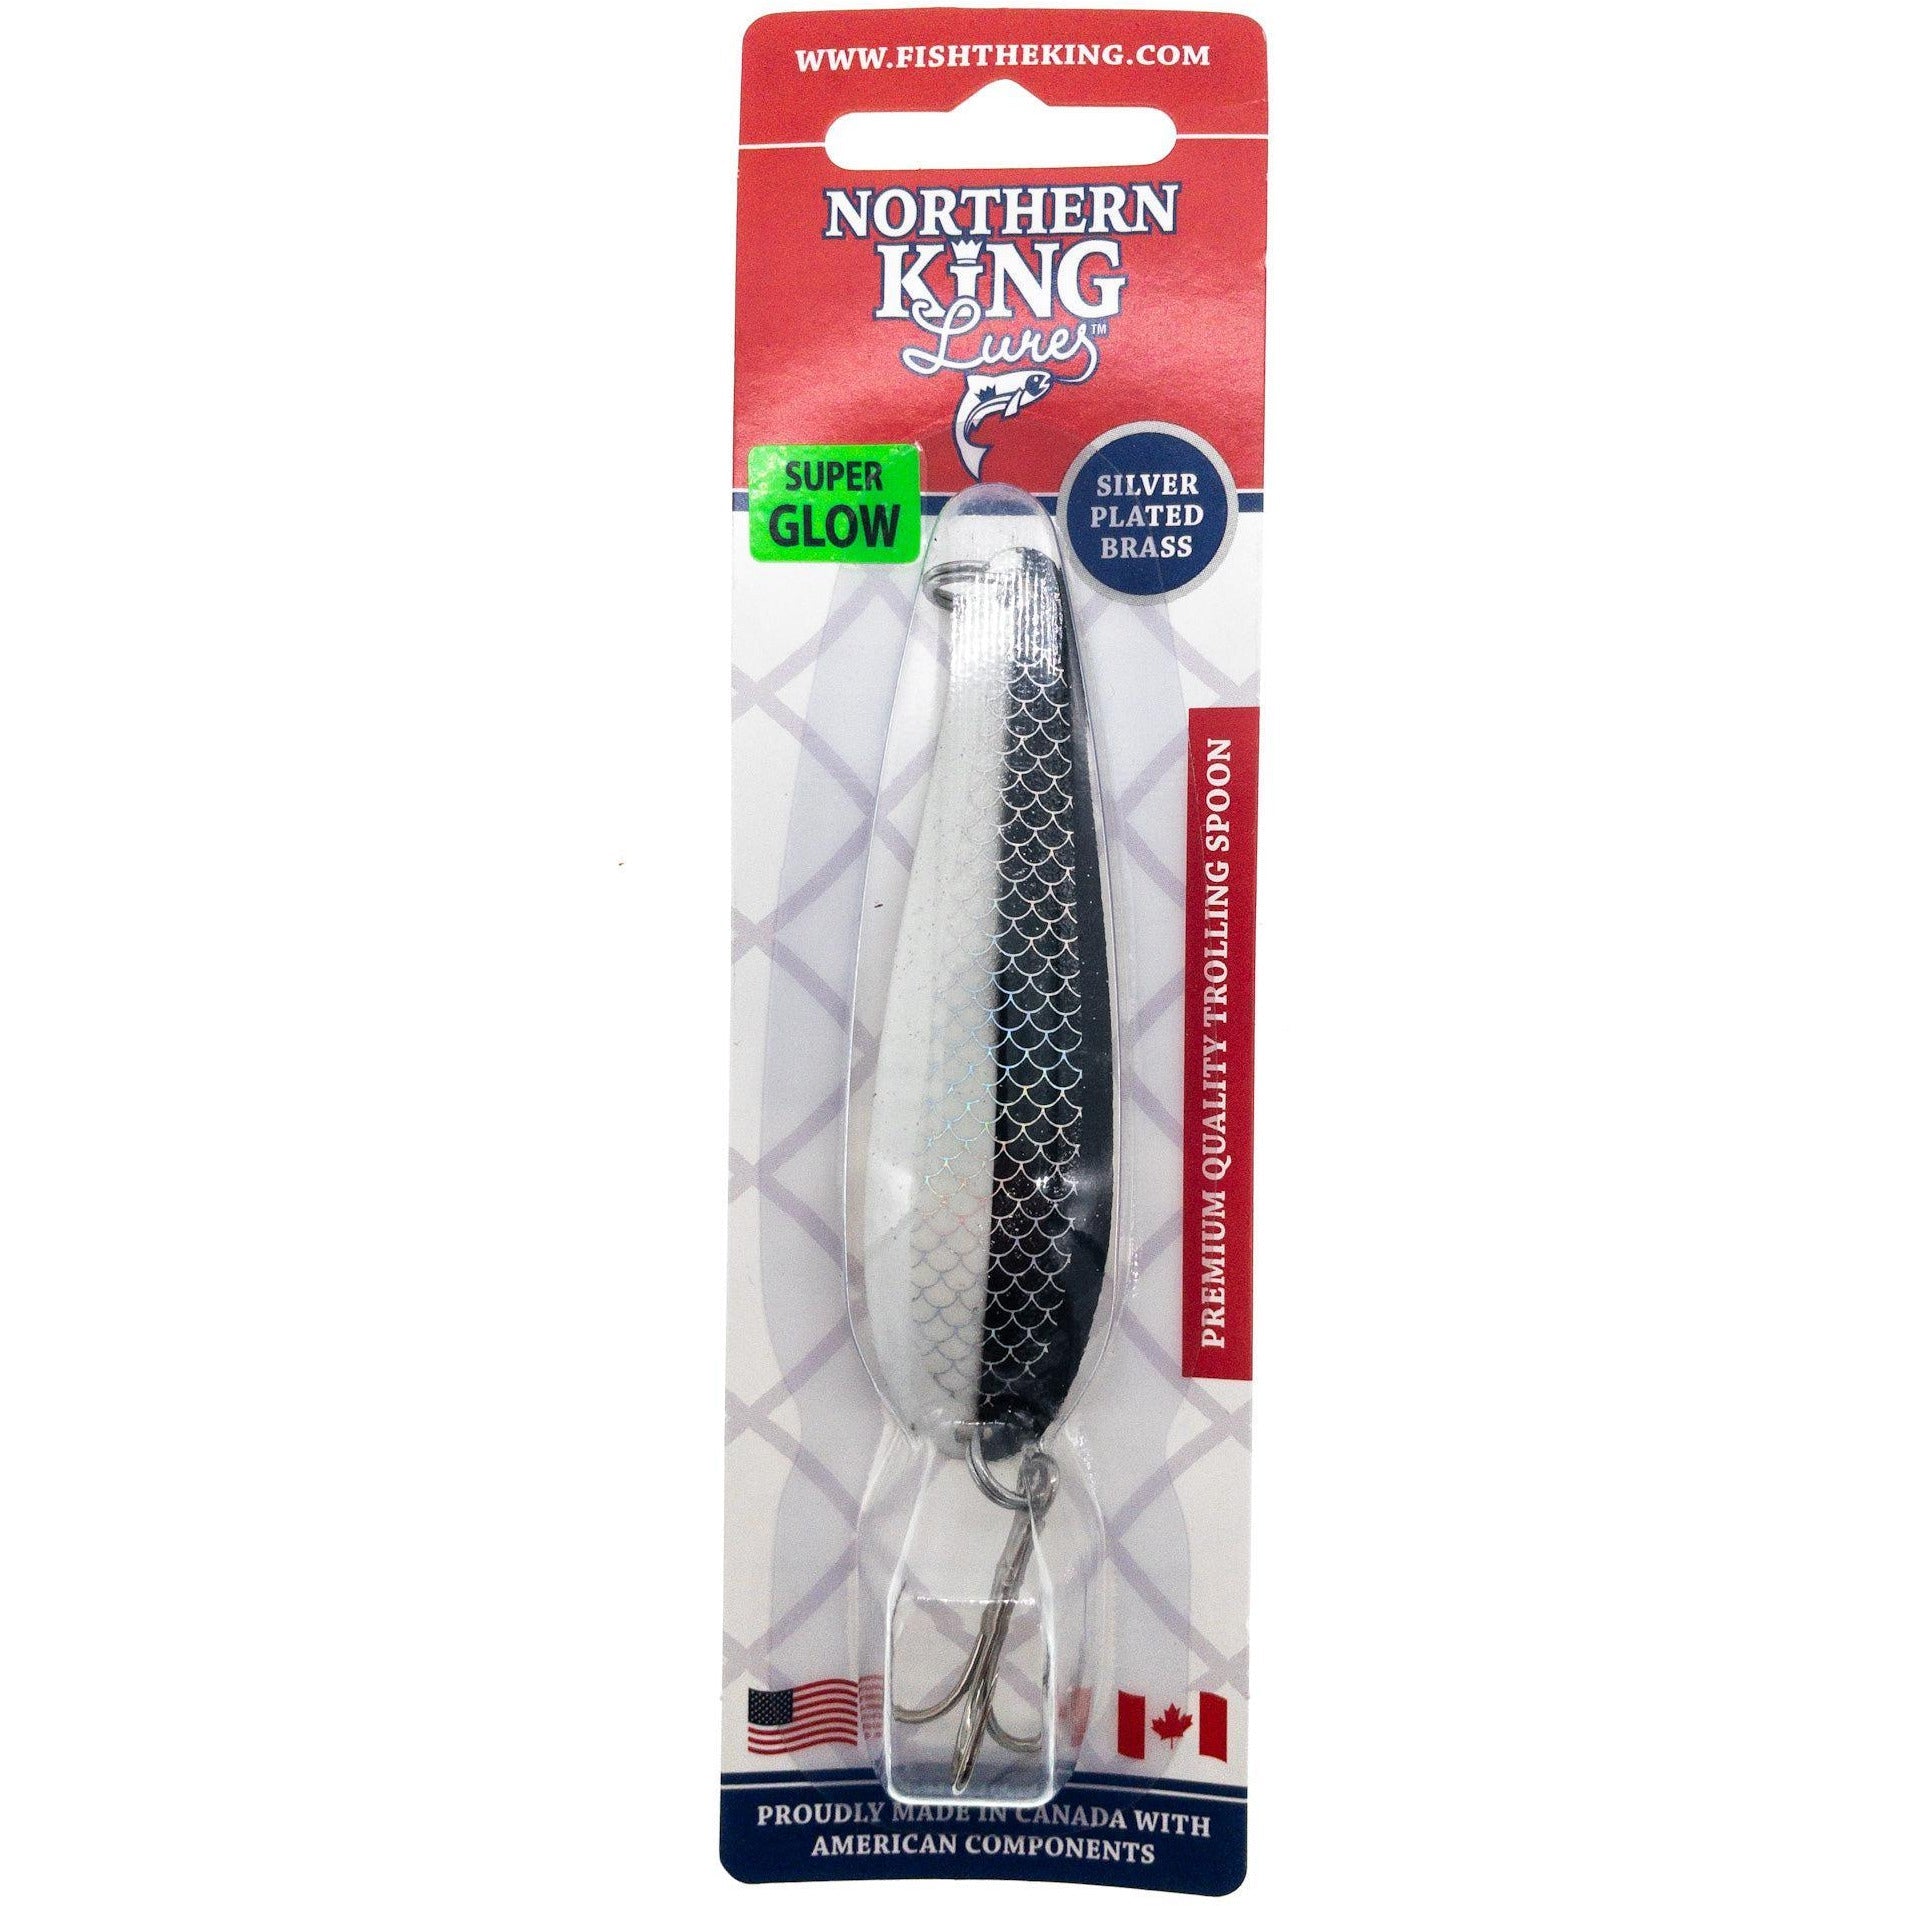 Northern King NK-MAG Spoon – Natural Sports - The Fishing Store